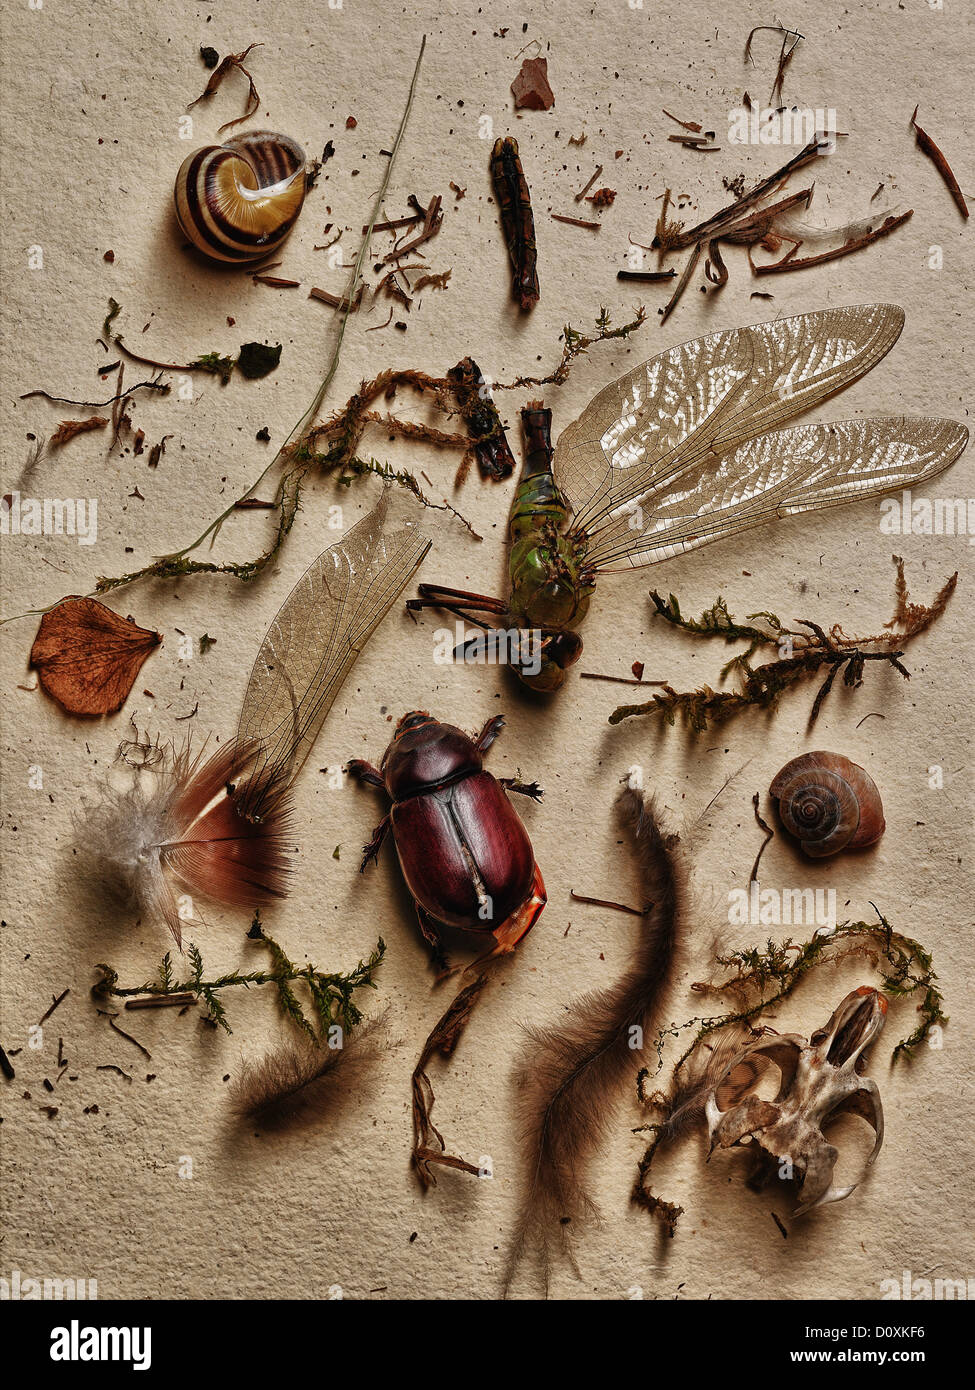 Insects and other elements from nature Stock Photo